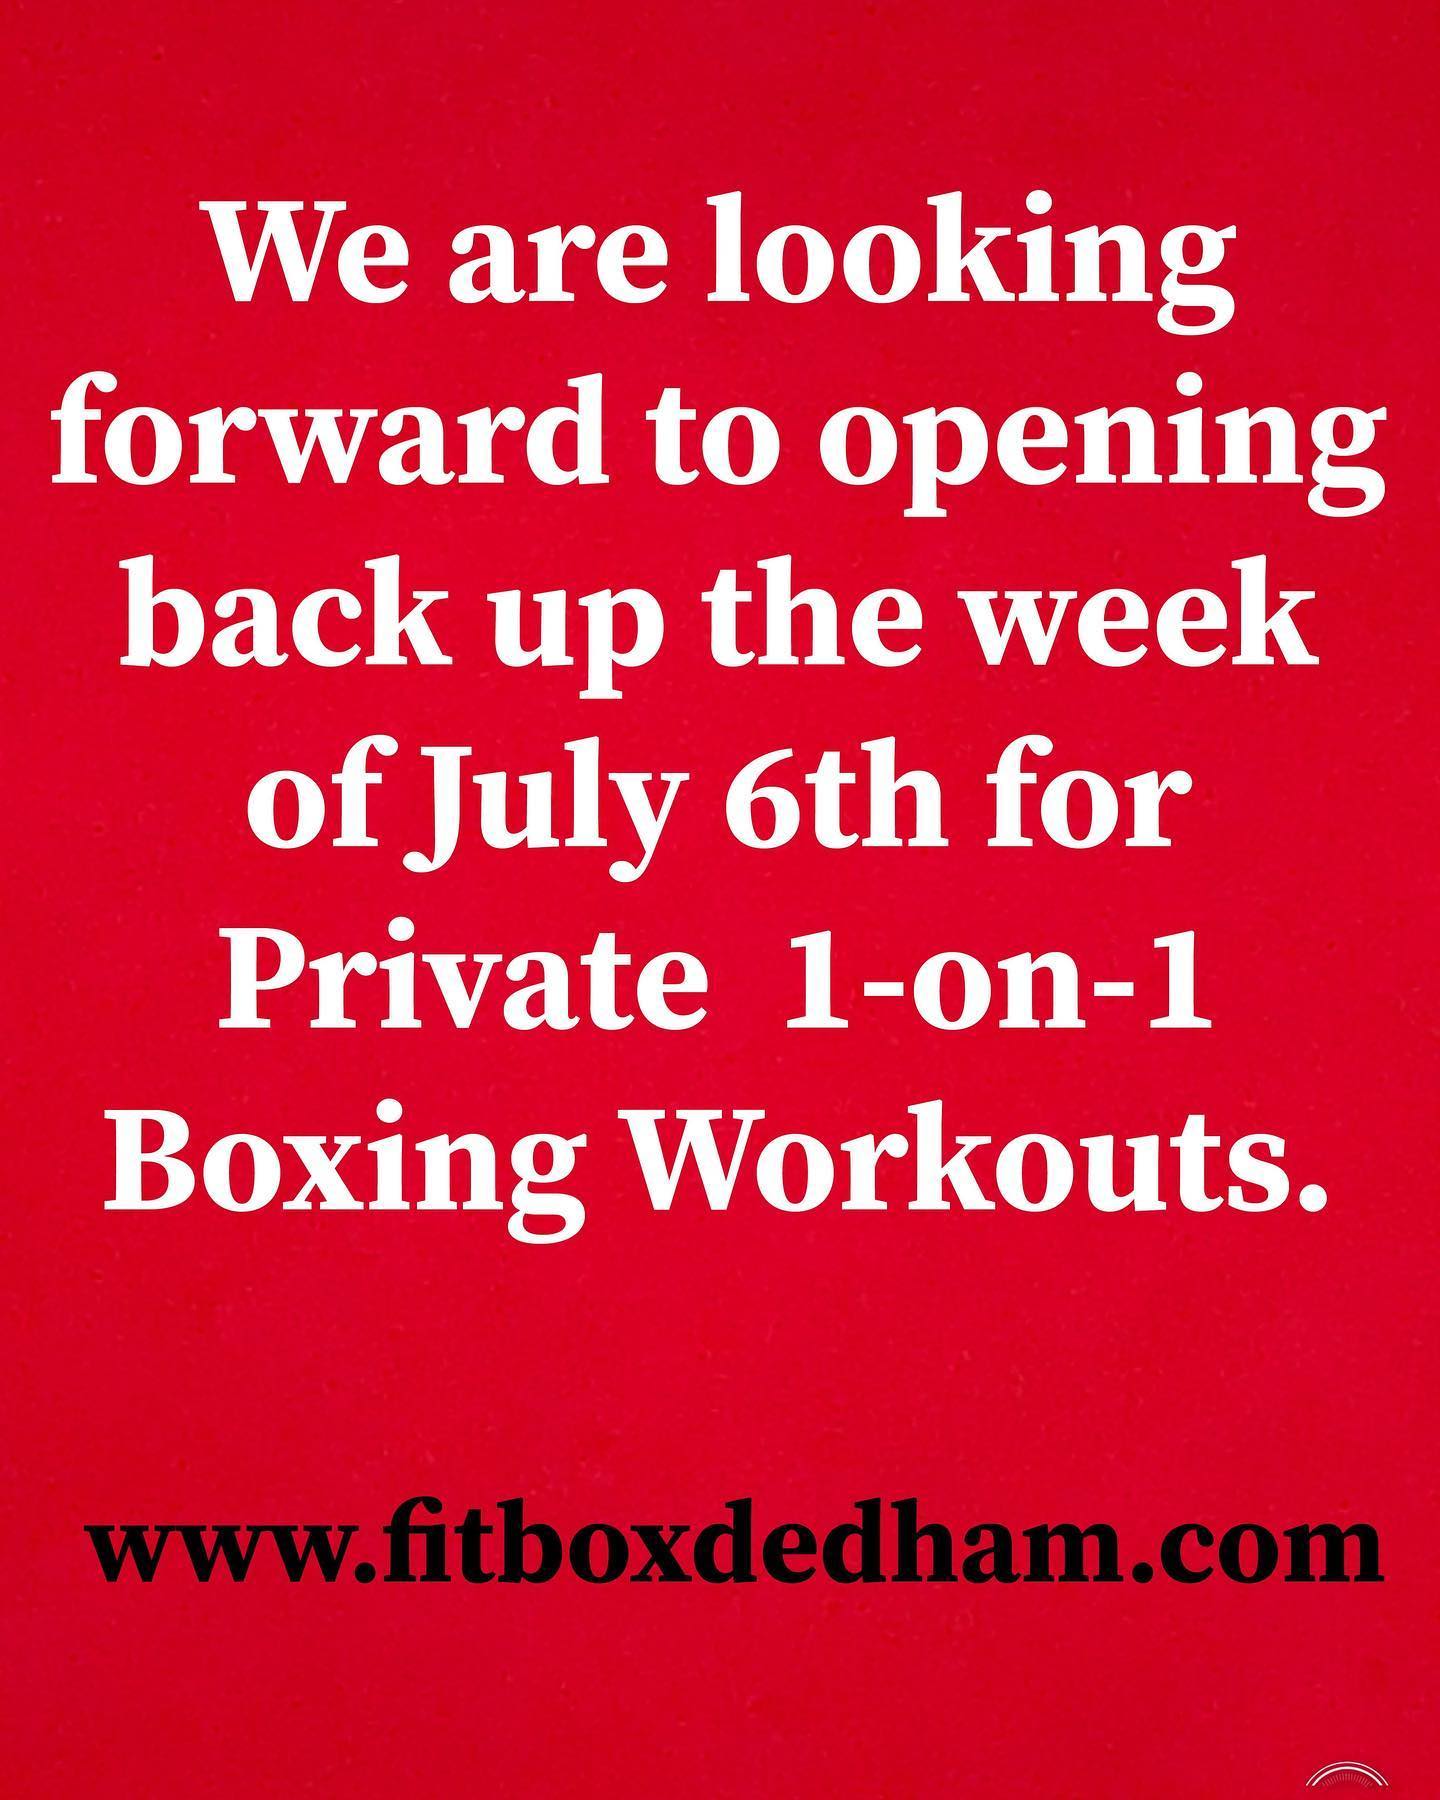 Contact us for more information by phone Call/text at (781)727-9503 or email FitBOX@outlook.com